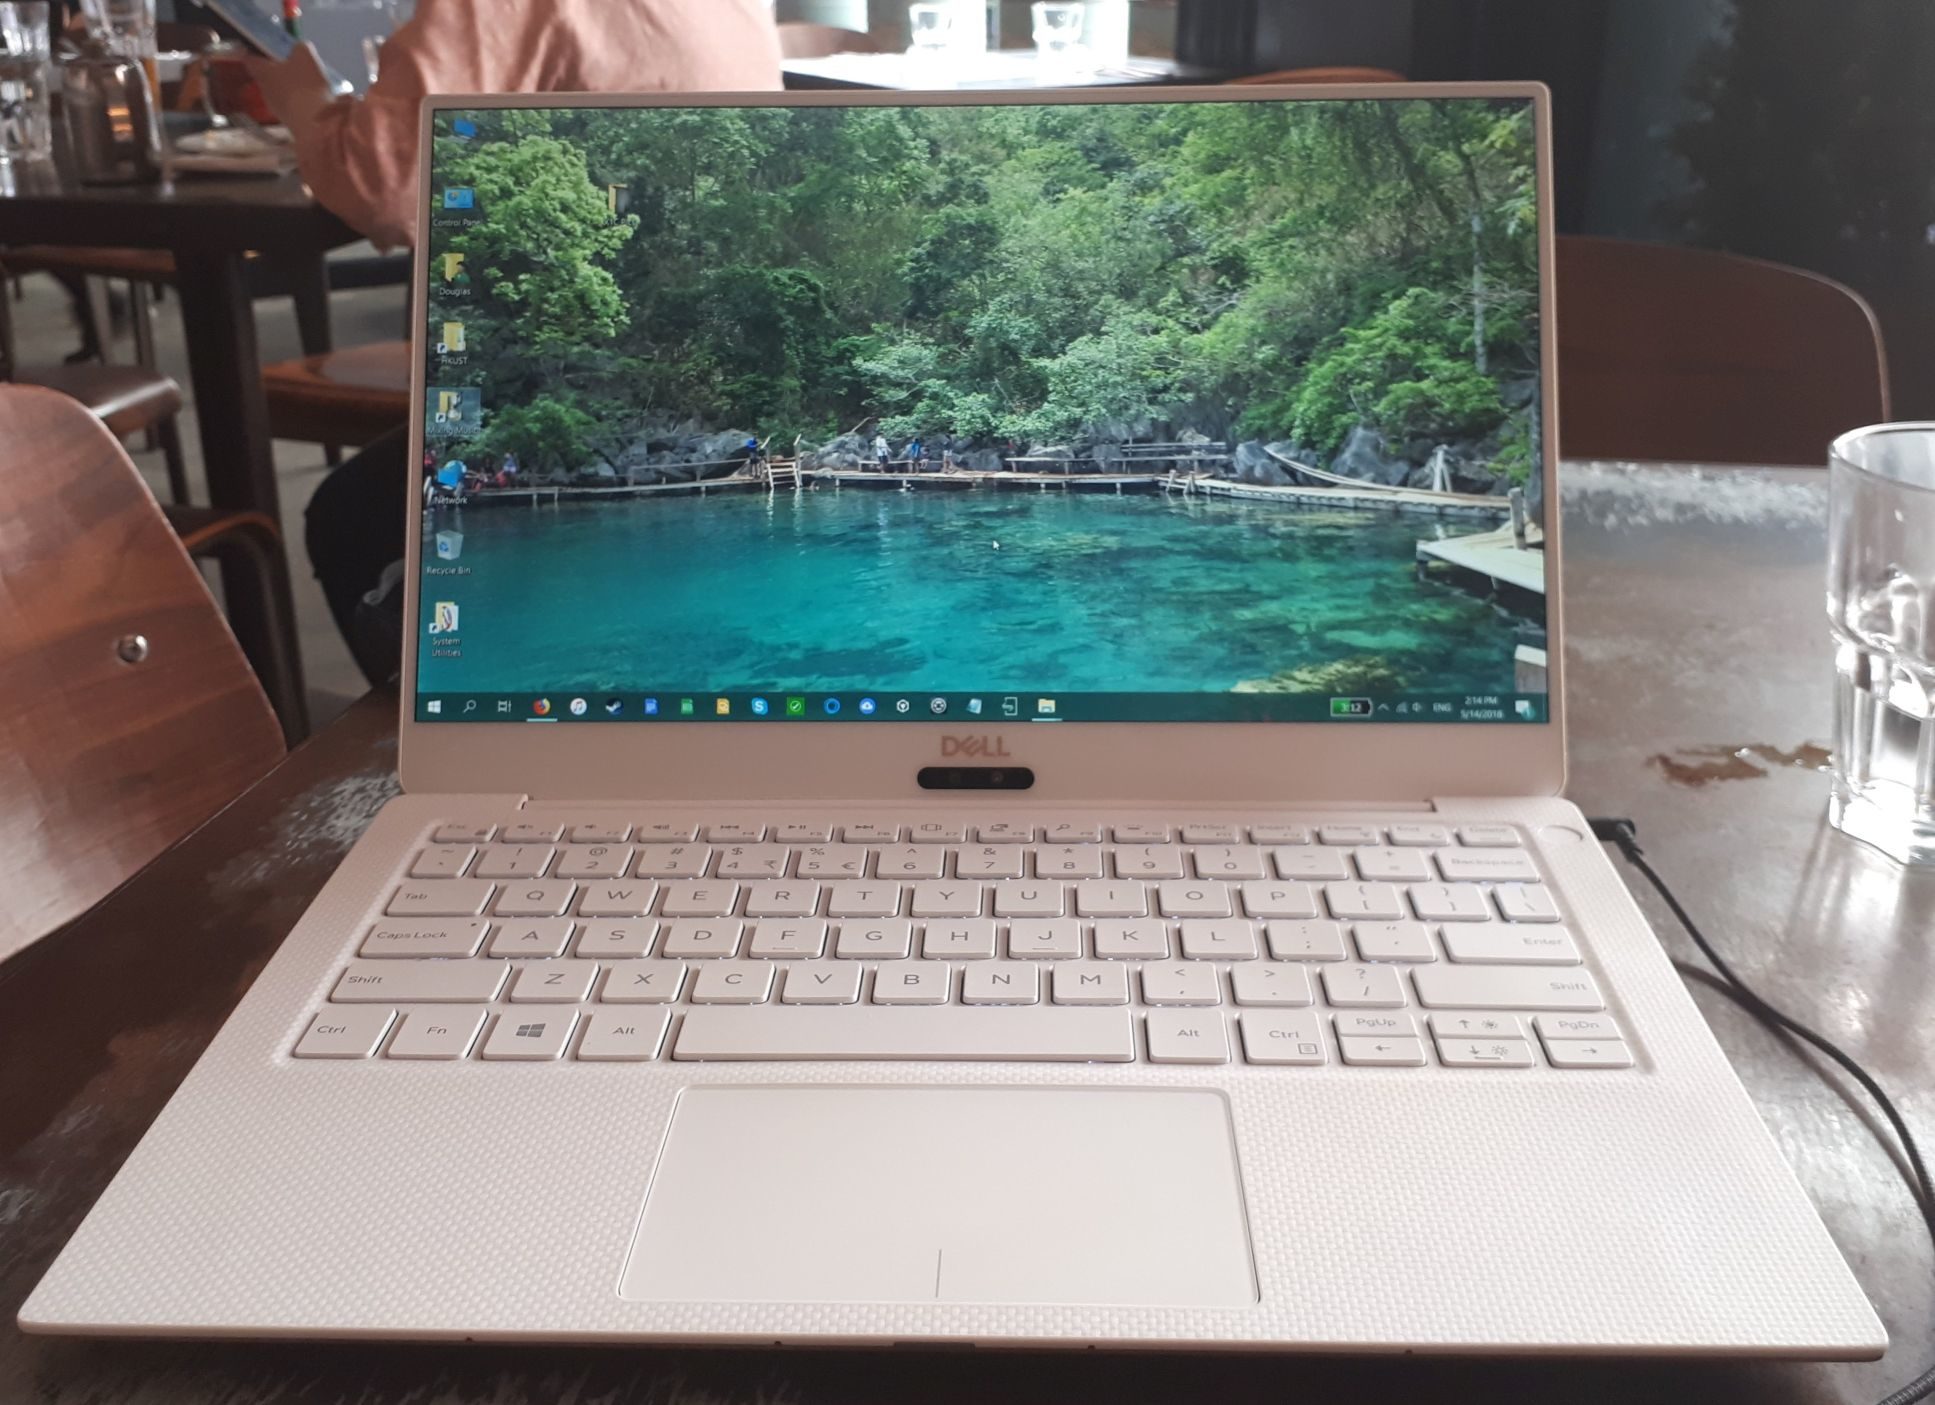 Dell's XPS 13 9370